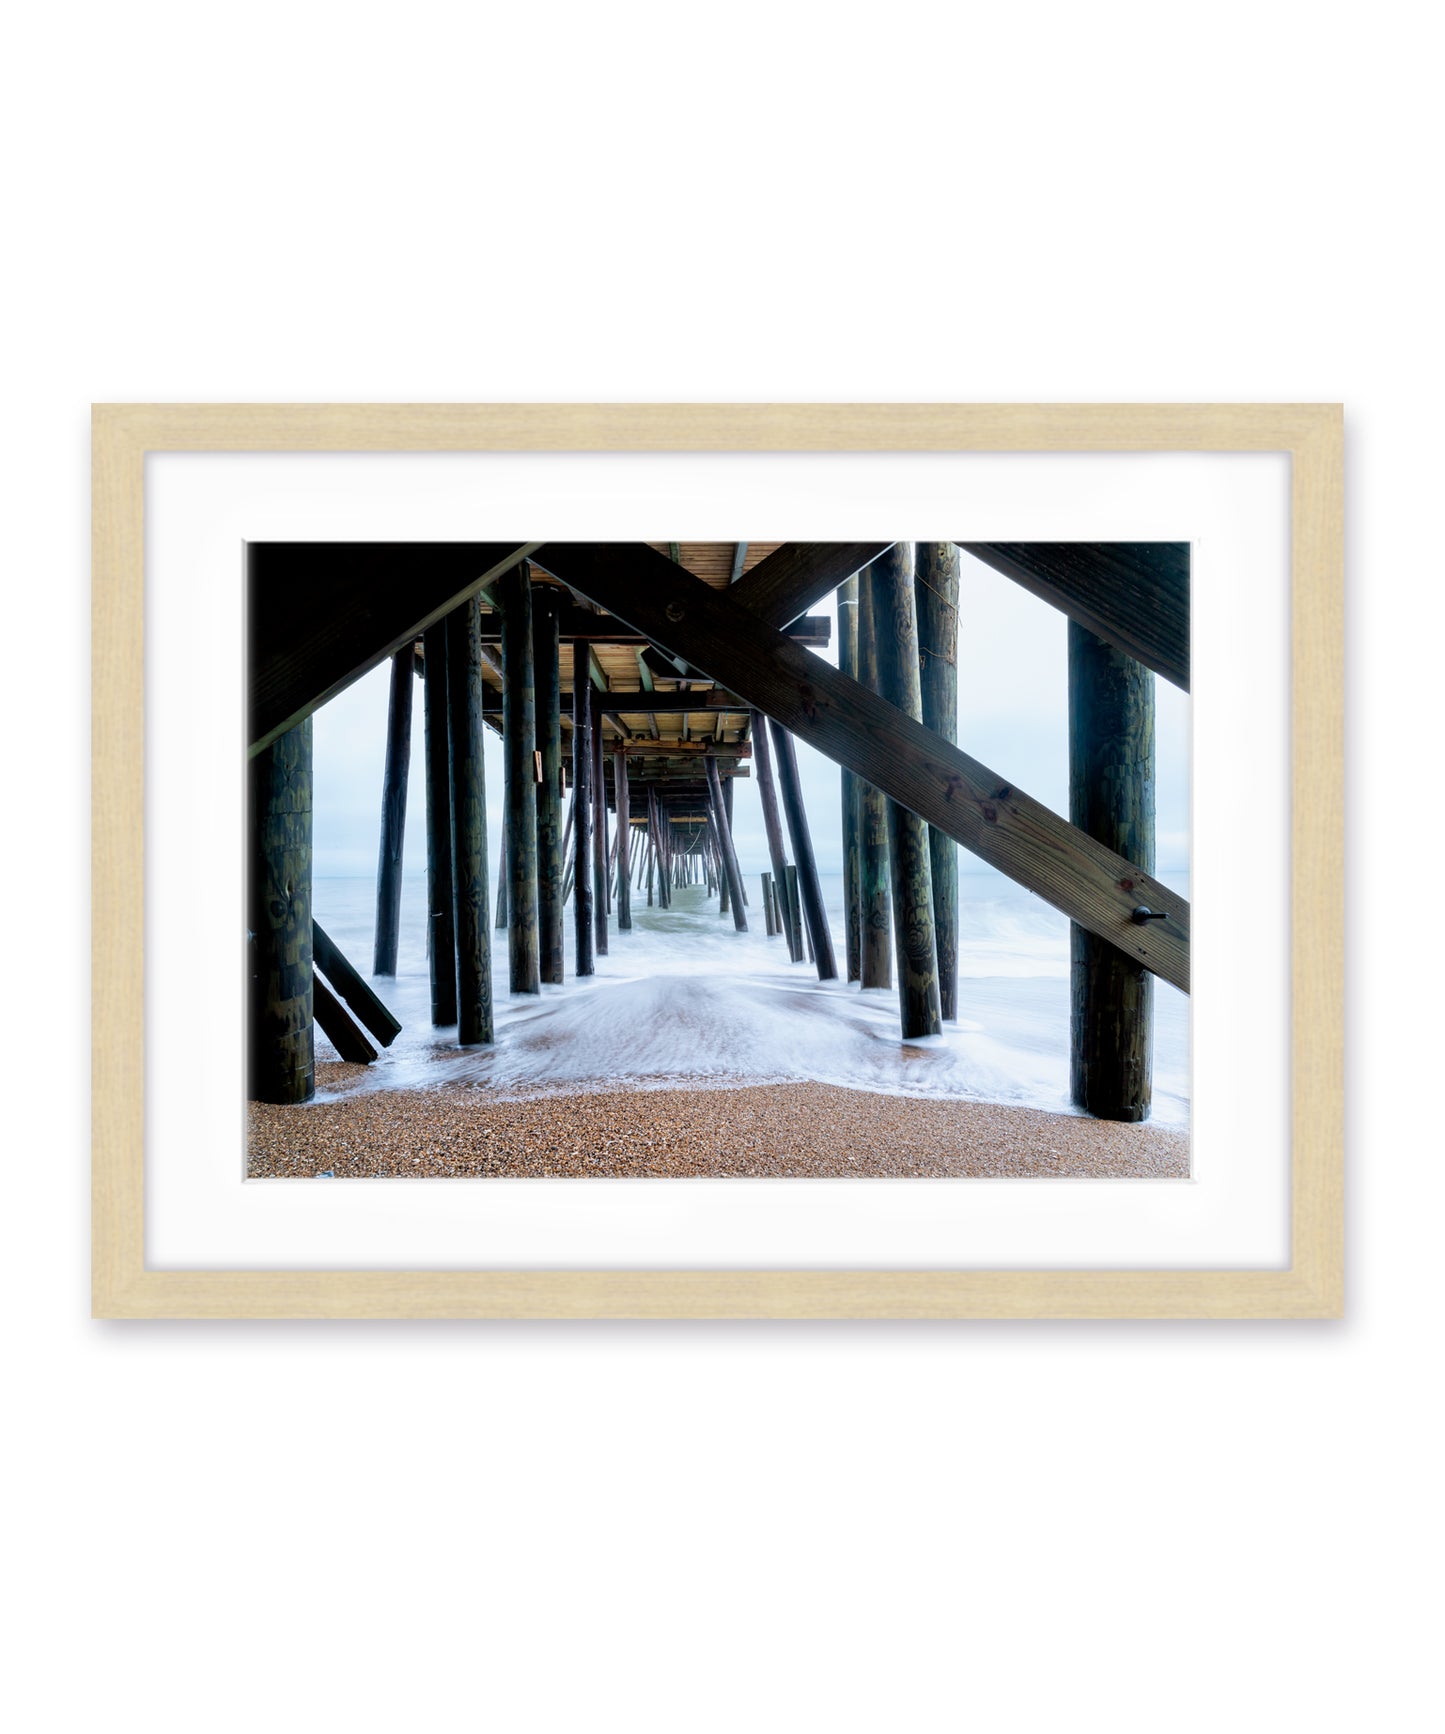 outer banks, avalon pier photograph art print by Wright and Roam, wood frame